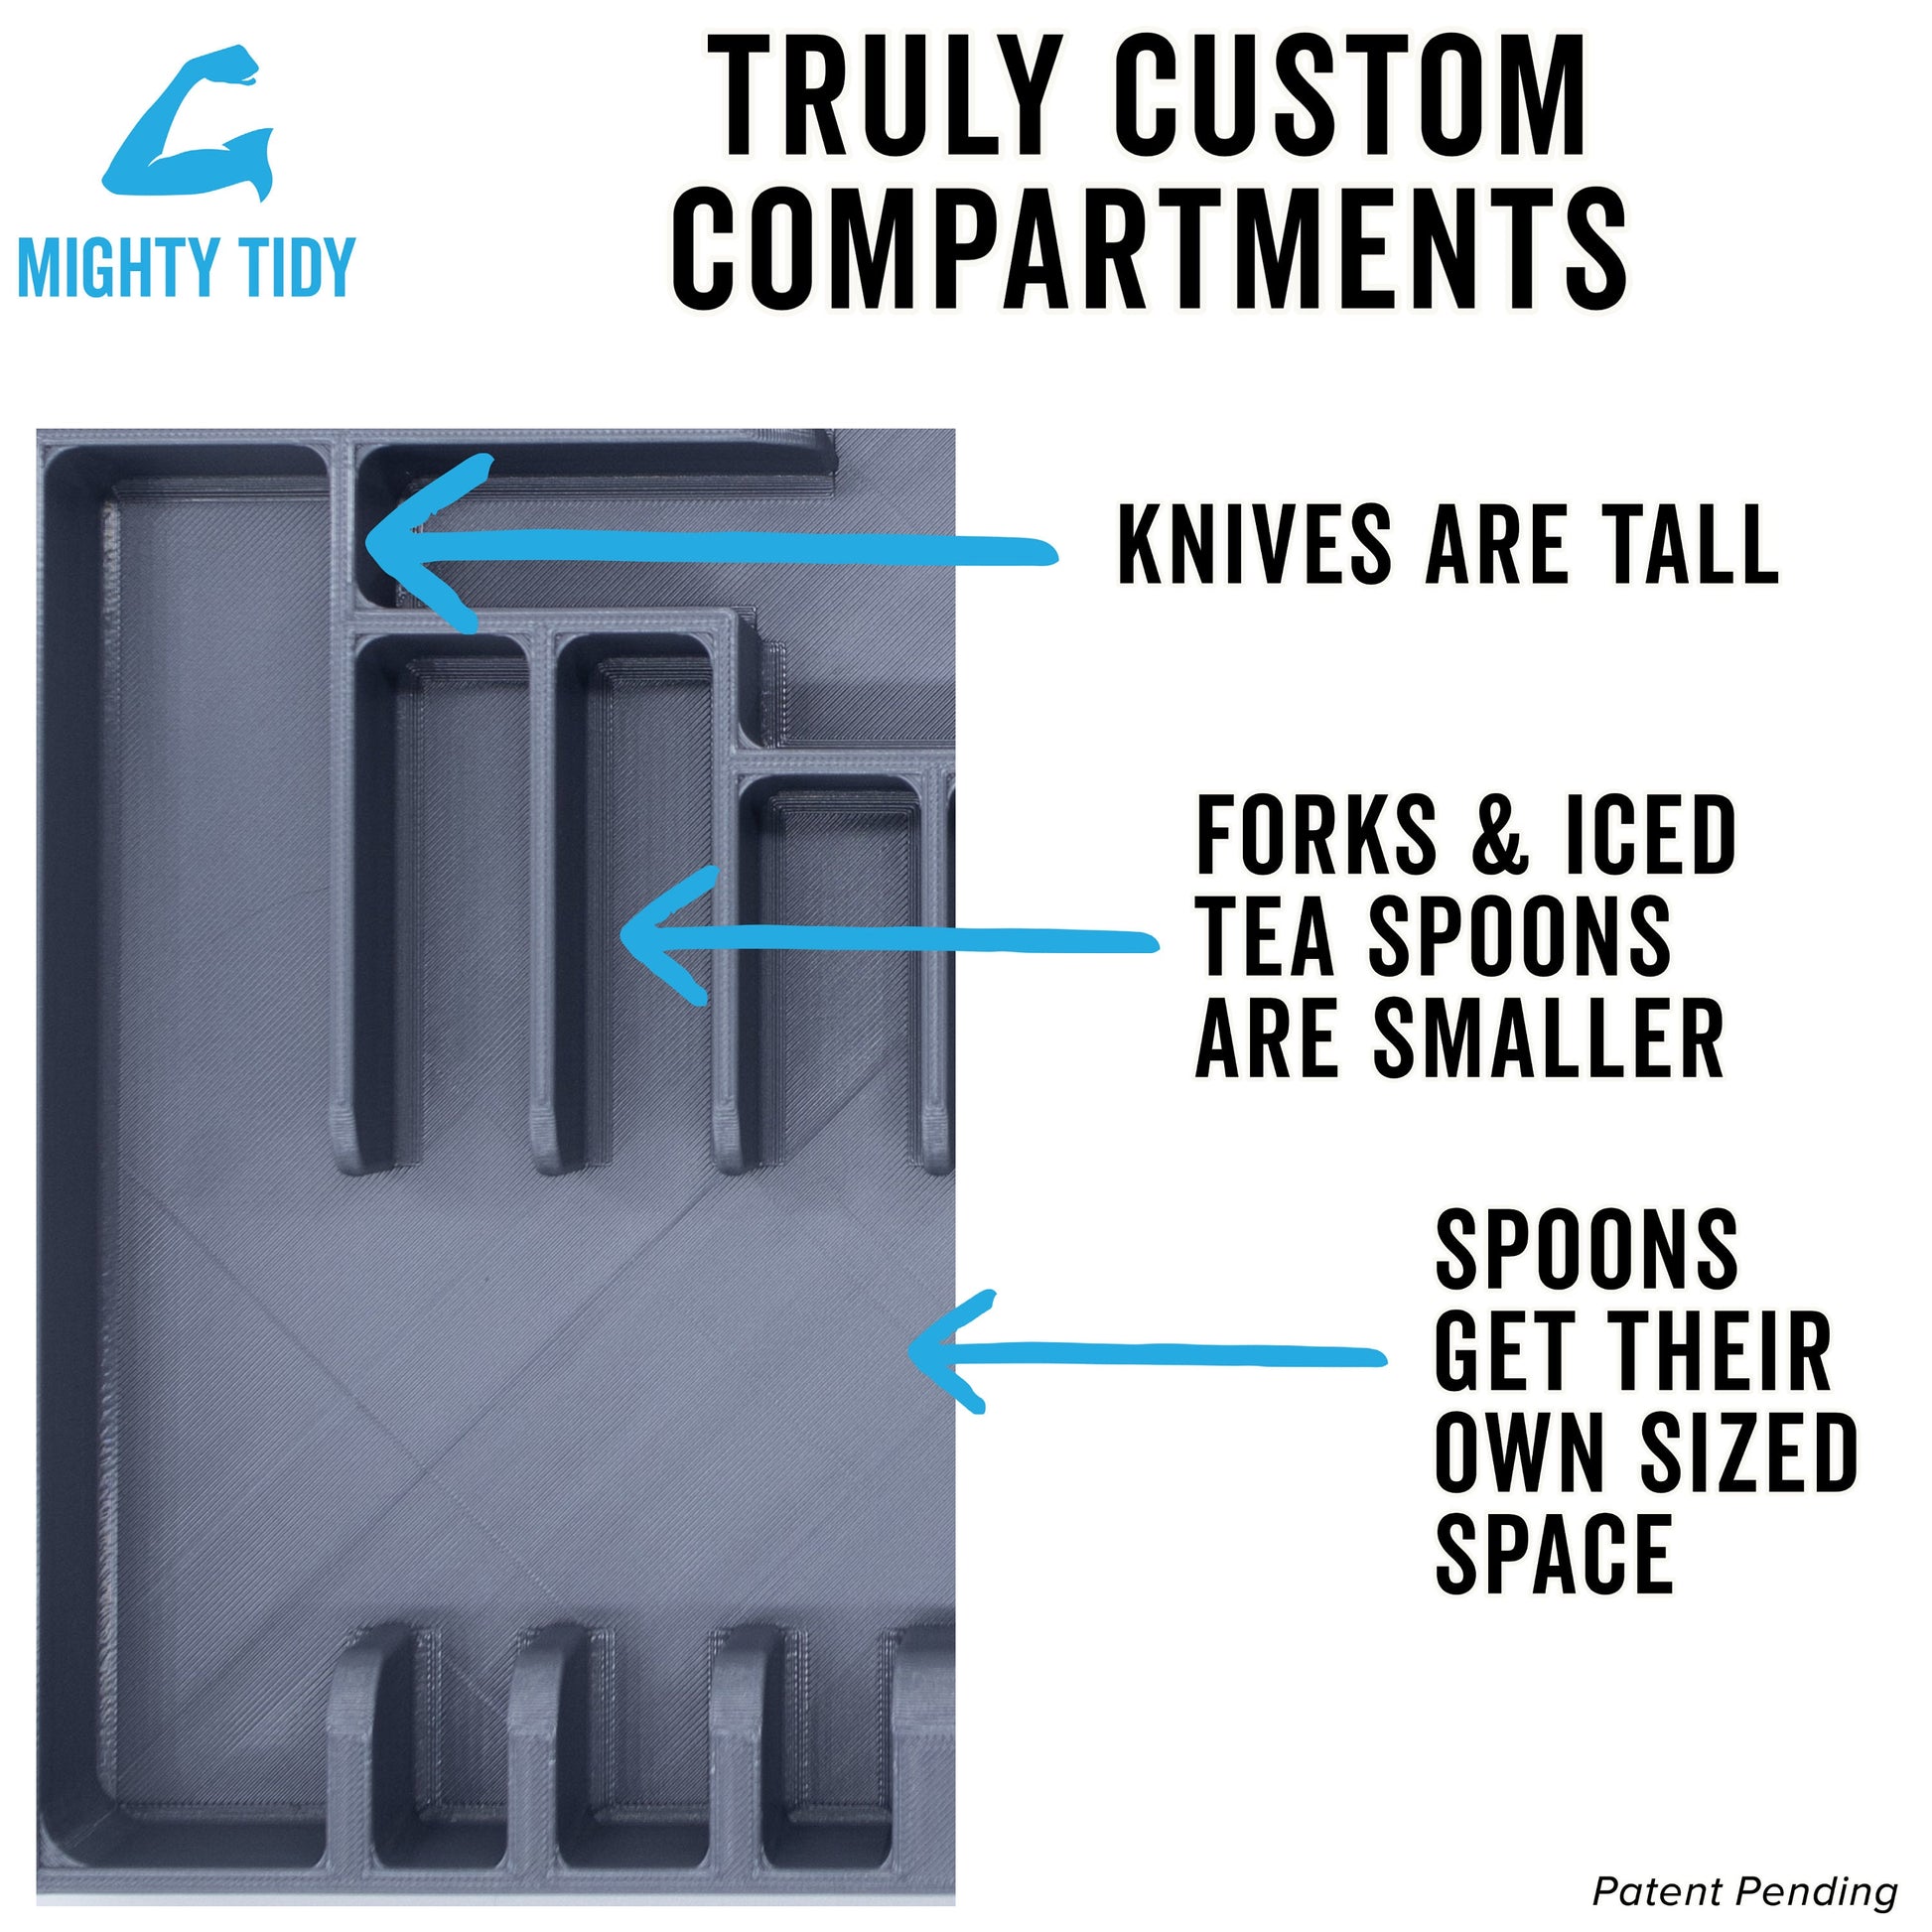 truly custom compartments; knives are tall; forks & iced tea spoons are smaller; spoons get their own sized space.